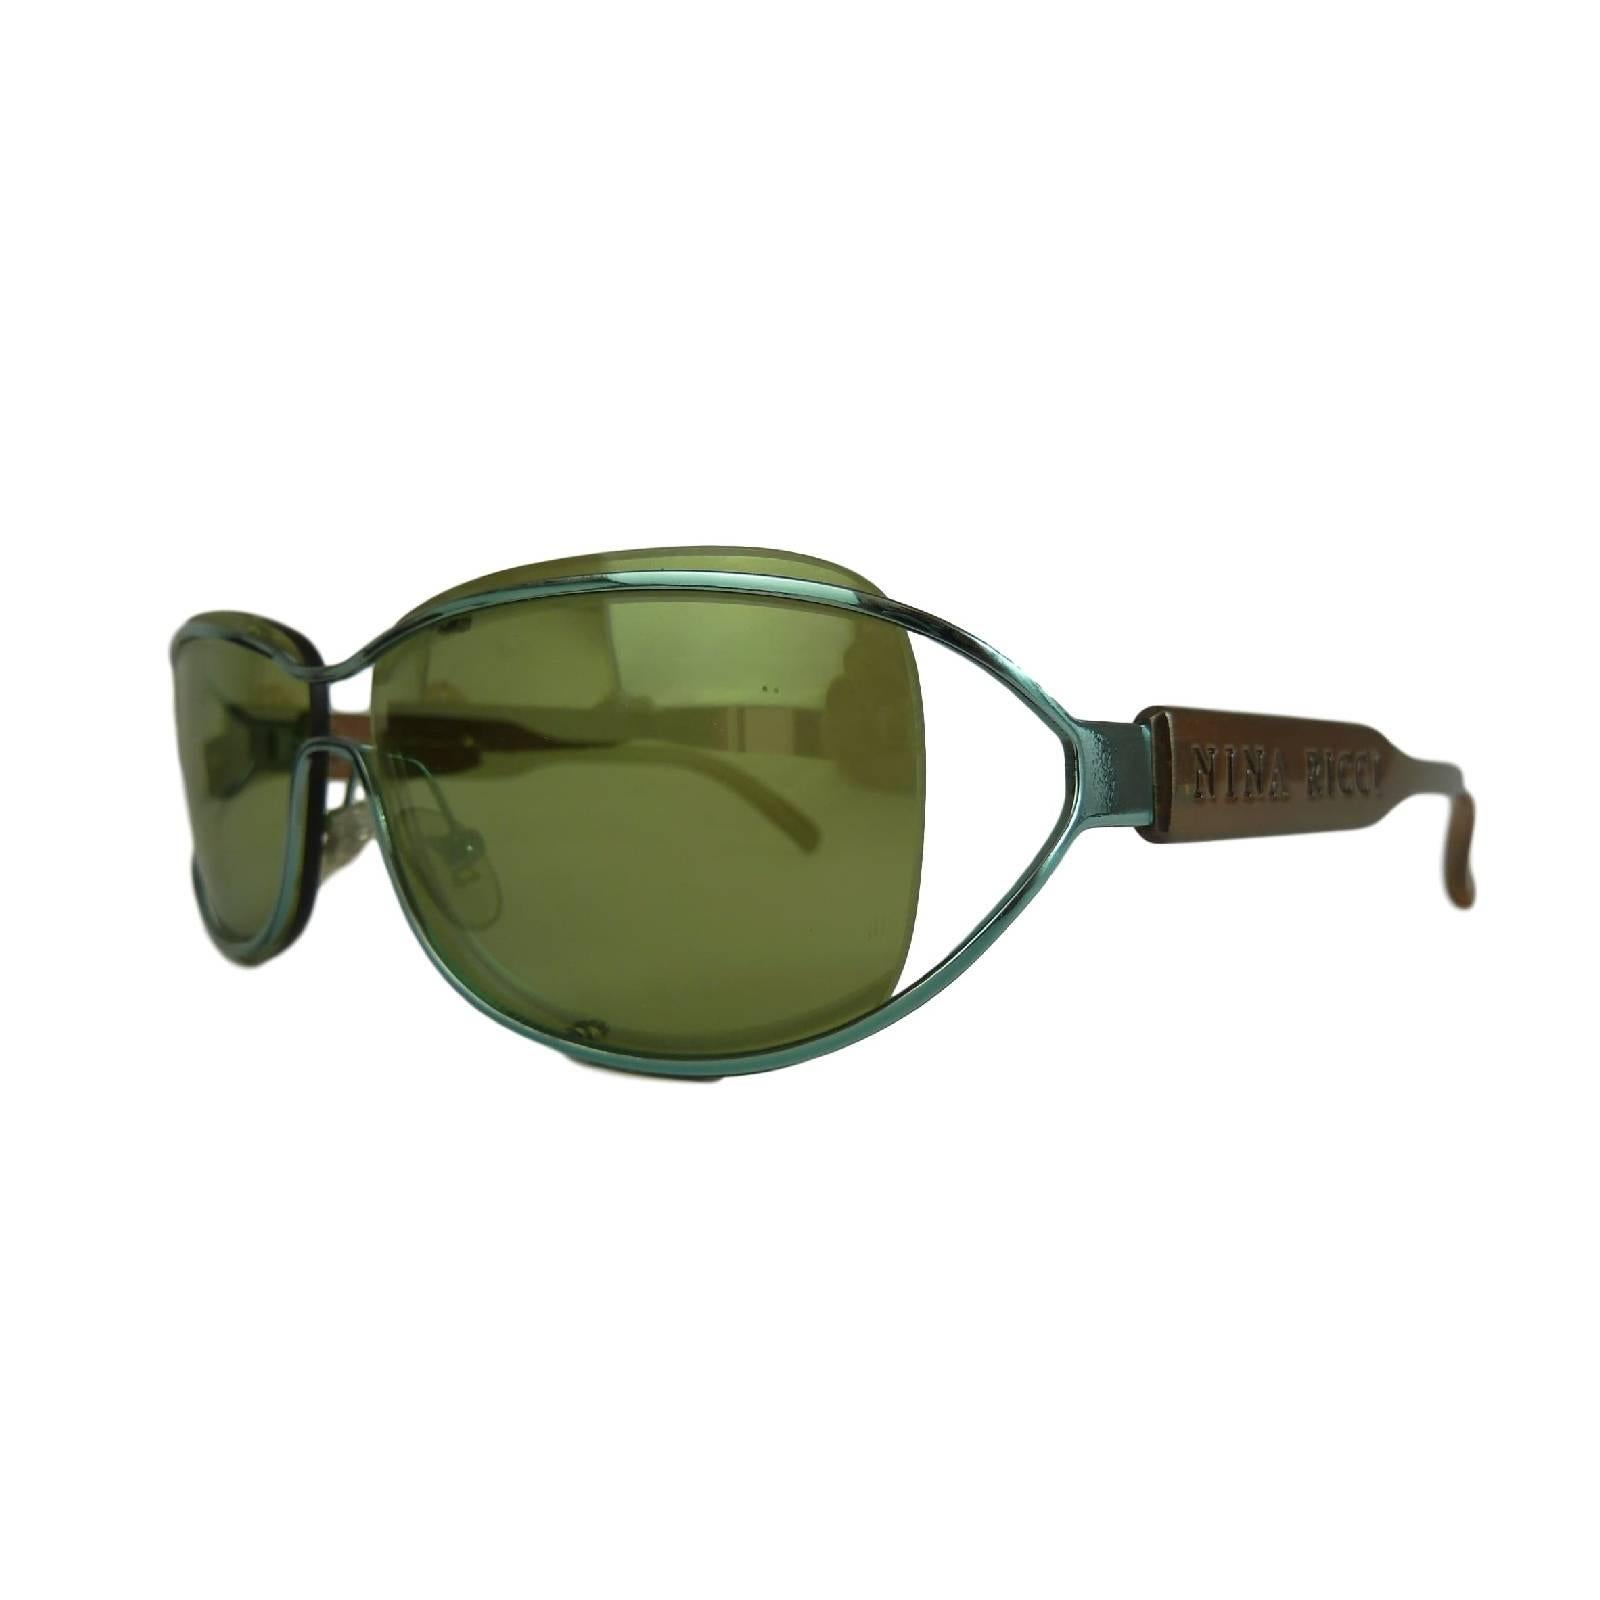 Nina Ricci vintage sunglasses NR 3477 green and brown polycarbonate 1980s women’s, made in france. Icon for 1980s sunglasses style. 100% UV Protection

Size:

Eye size: 55 mm
Bridge: 15 mm
Temple Lenght: 130 mm

Model: NR 3477 E011 F1062

Condition: